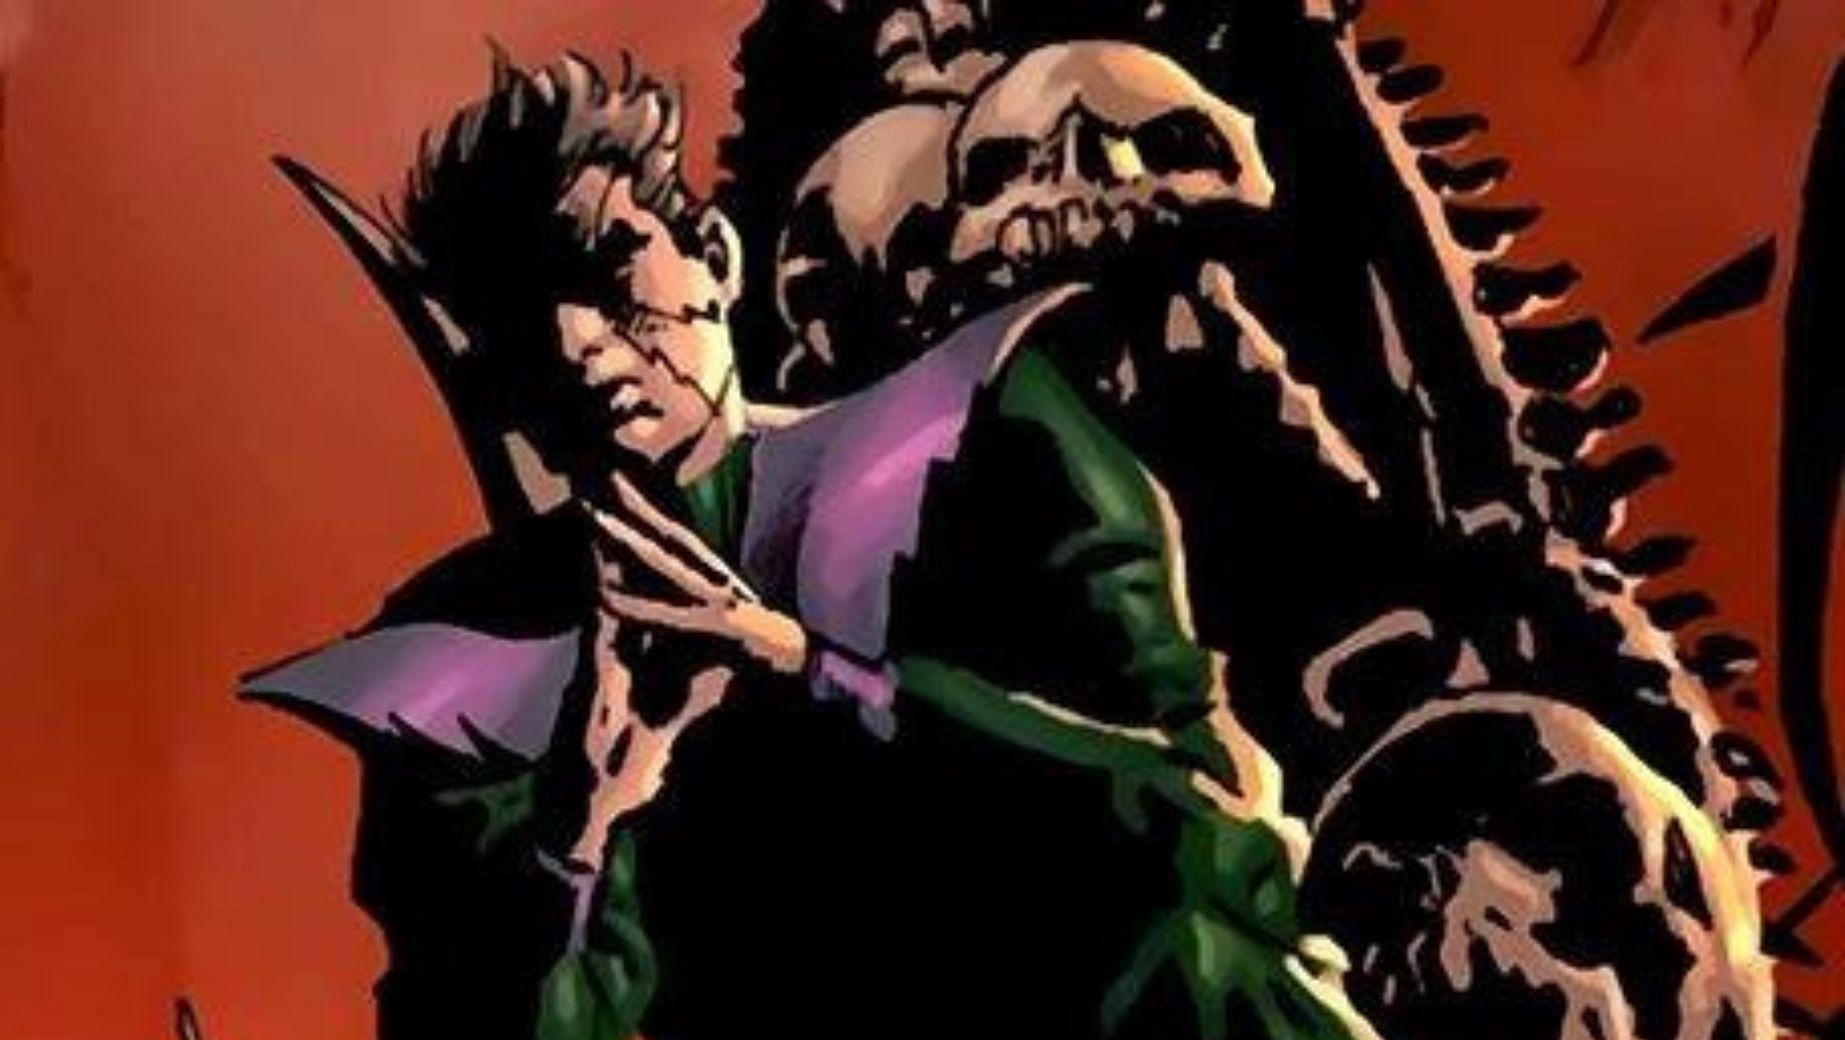 In Hickman&#039;s Avengers storyline, Molecule Man&#039;s true motivations and past traumas were revealed, making him a sympathetic and complex character (Image via Sportskeeda)